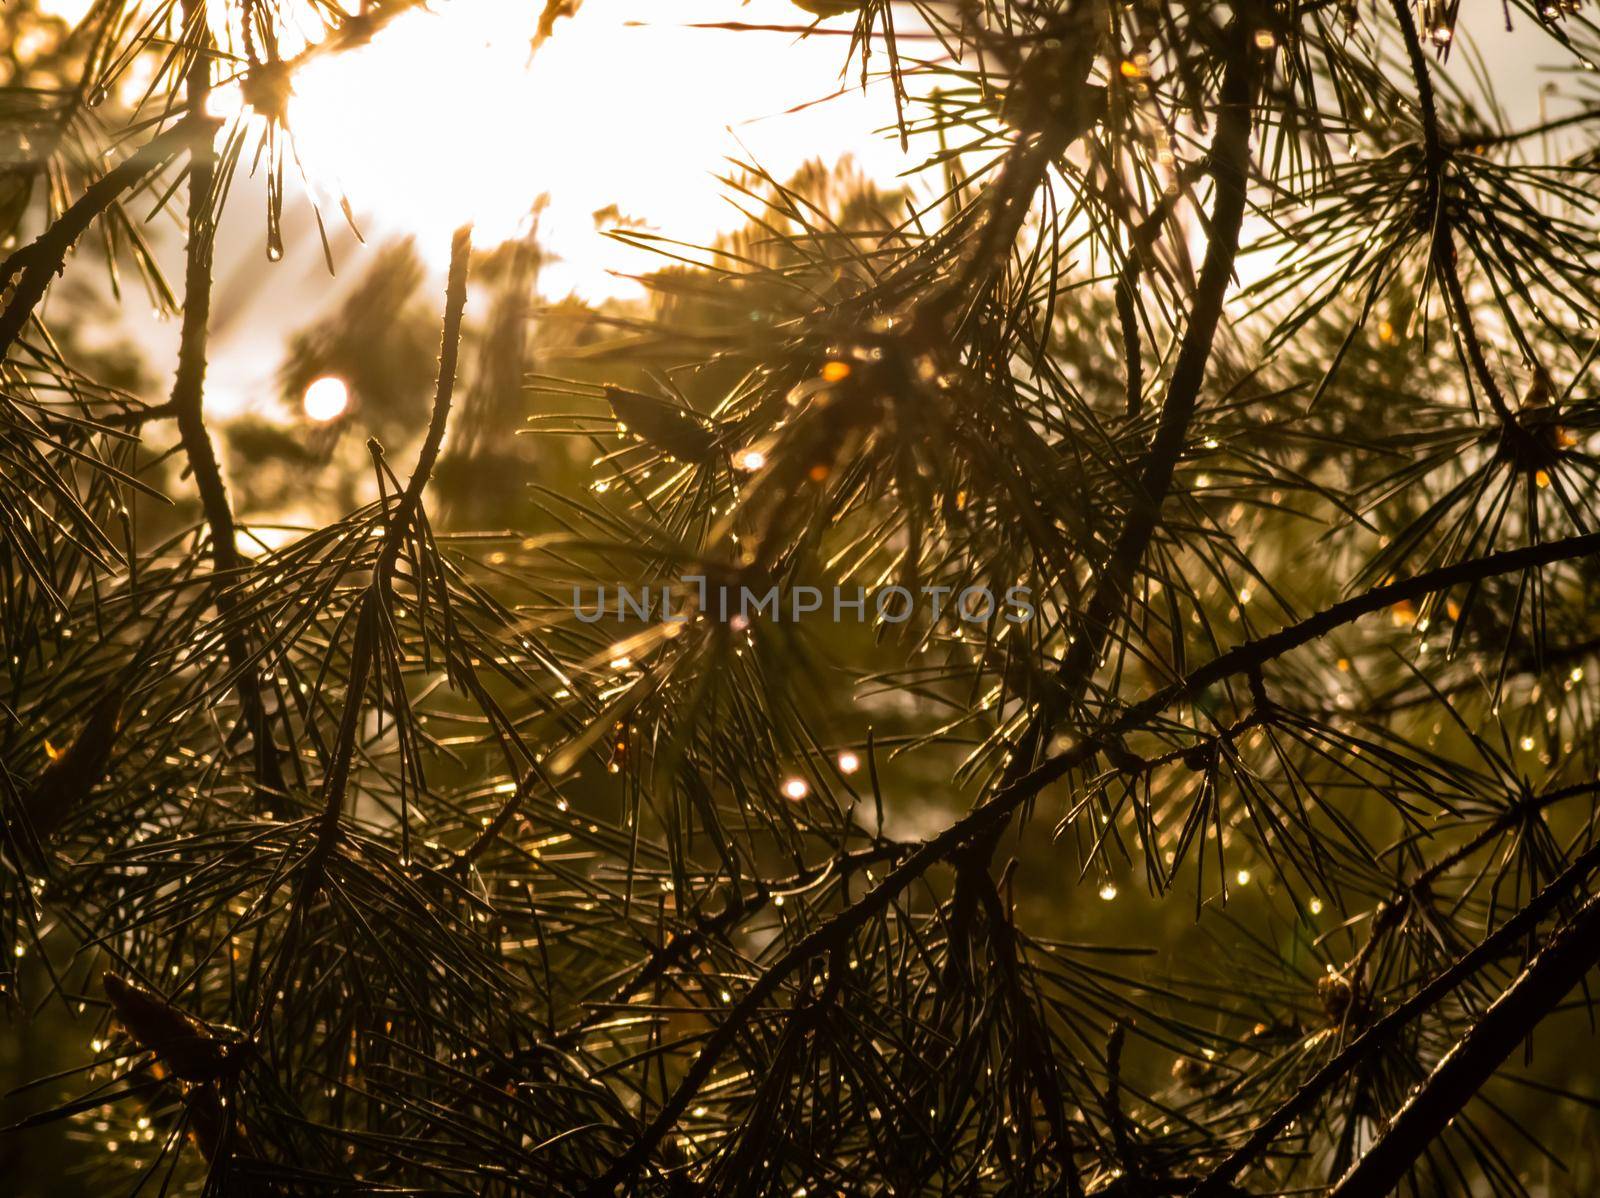 the sun shines through the coniferous branches in the forest by Mariaprovector